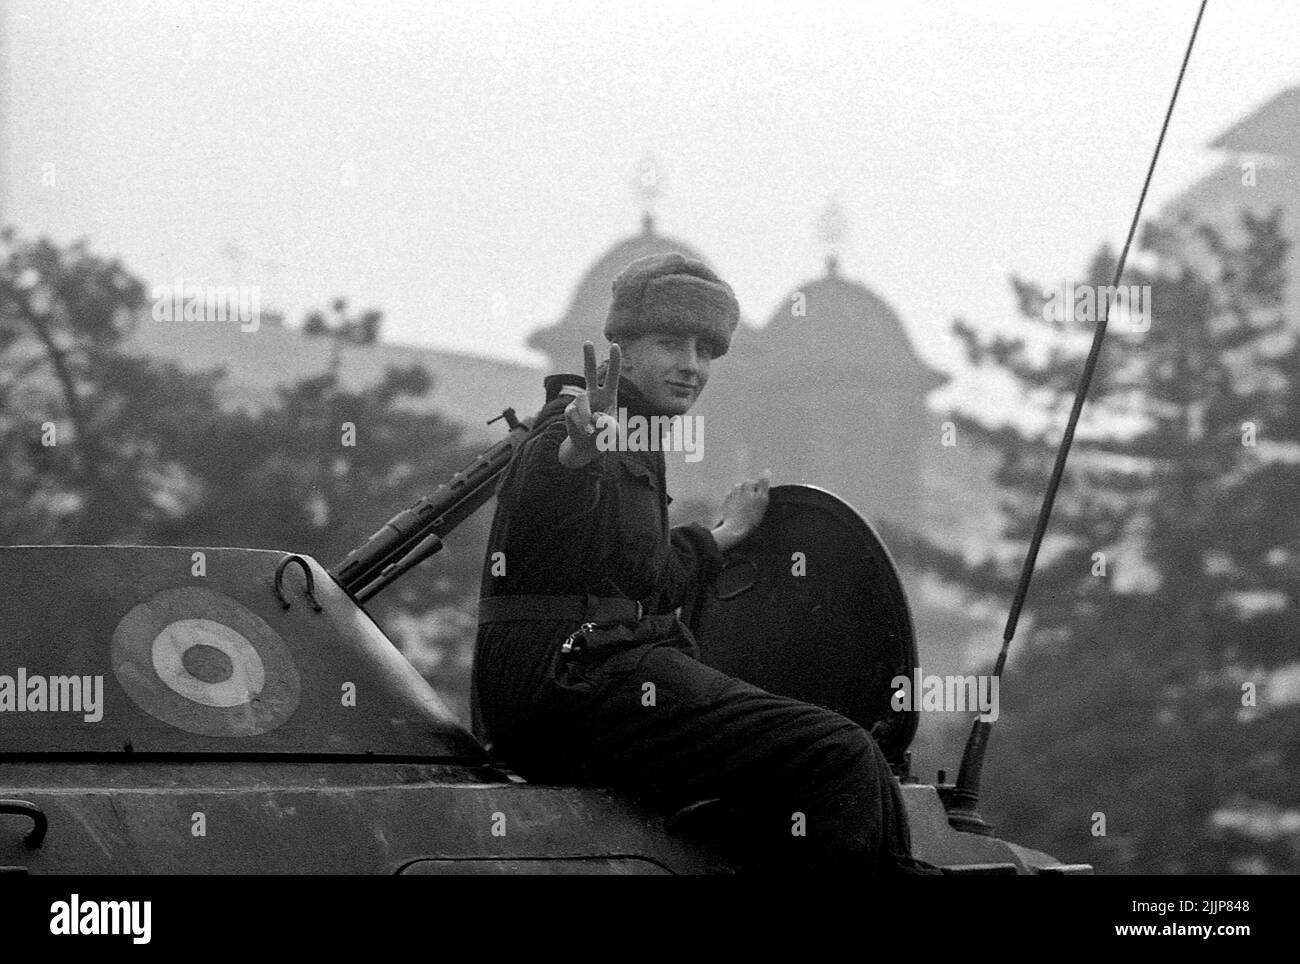 Bucharest, Romania, January 1990. Army in Piata Palatului/ Piata Revolutiei days after the Romanian anticommunist revolution of December 1989. Soldiers making the victory sign. Stock Photo